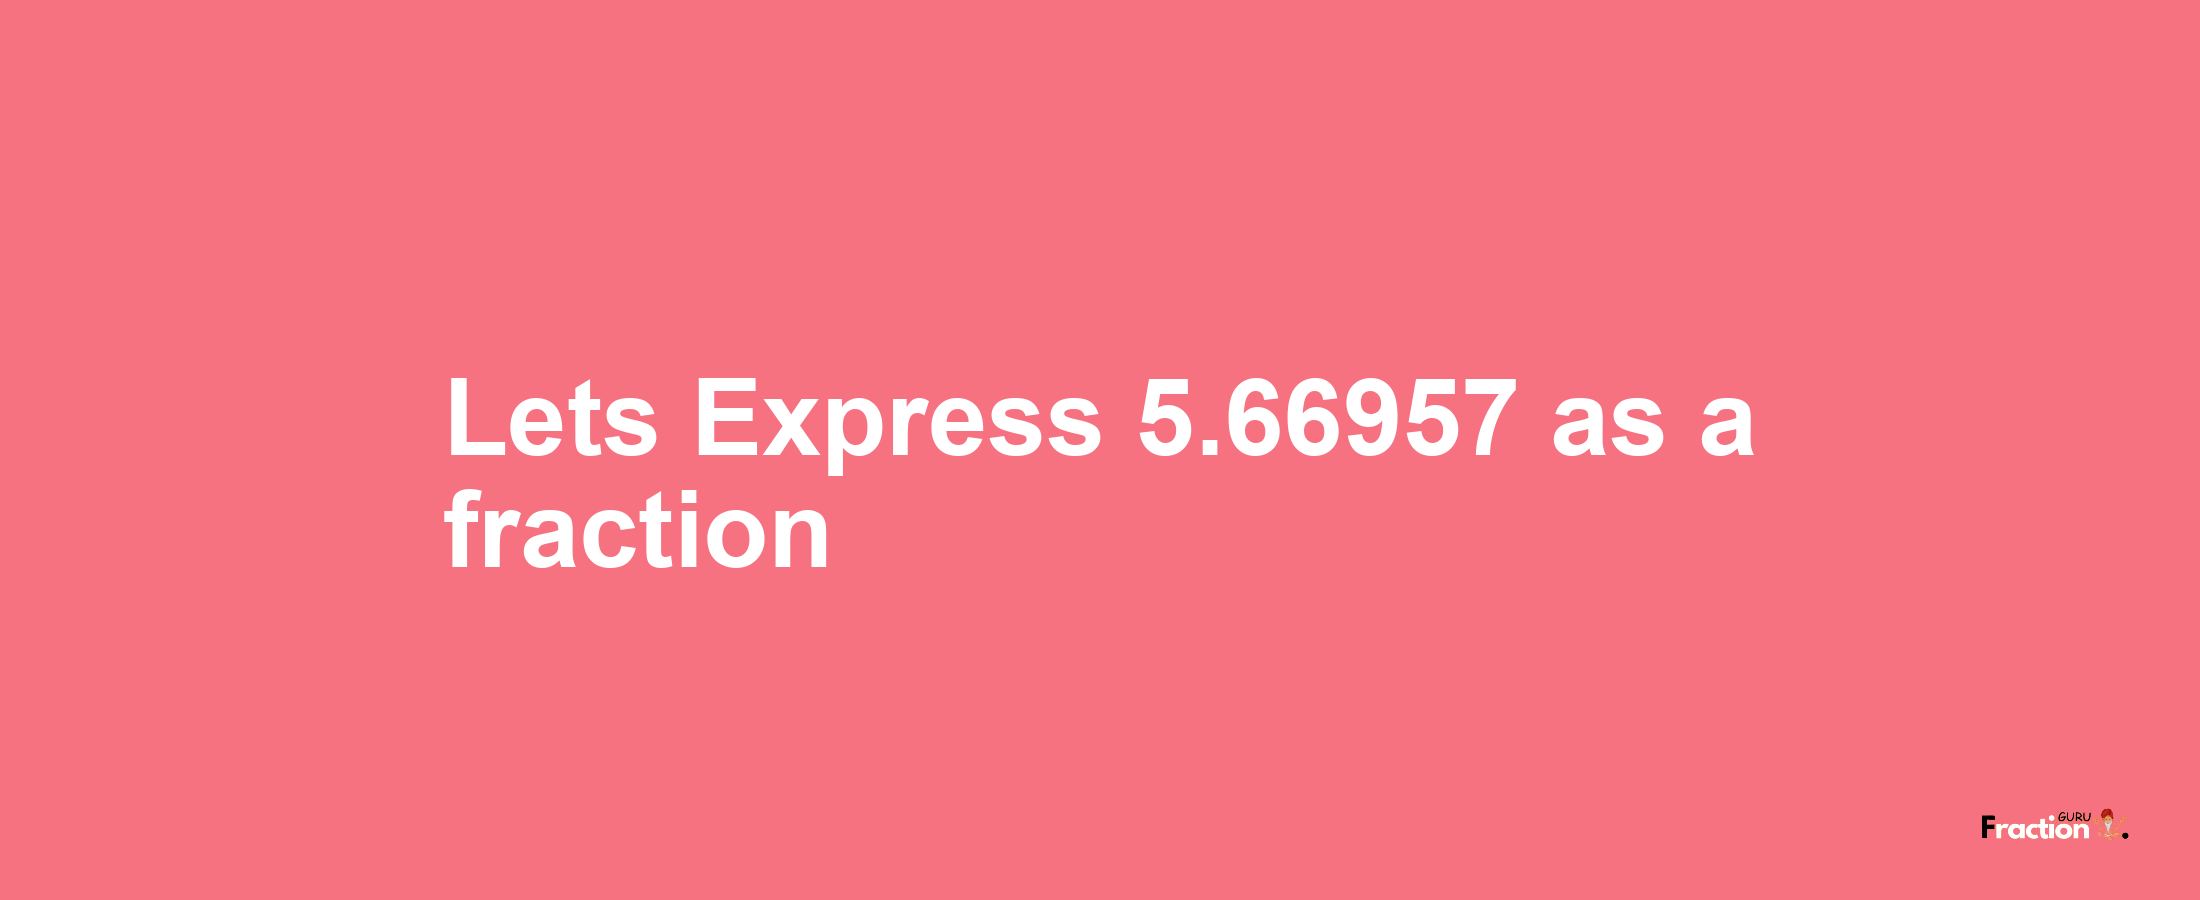 Lets Express 5.66957 as afraction